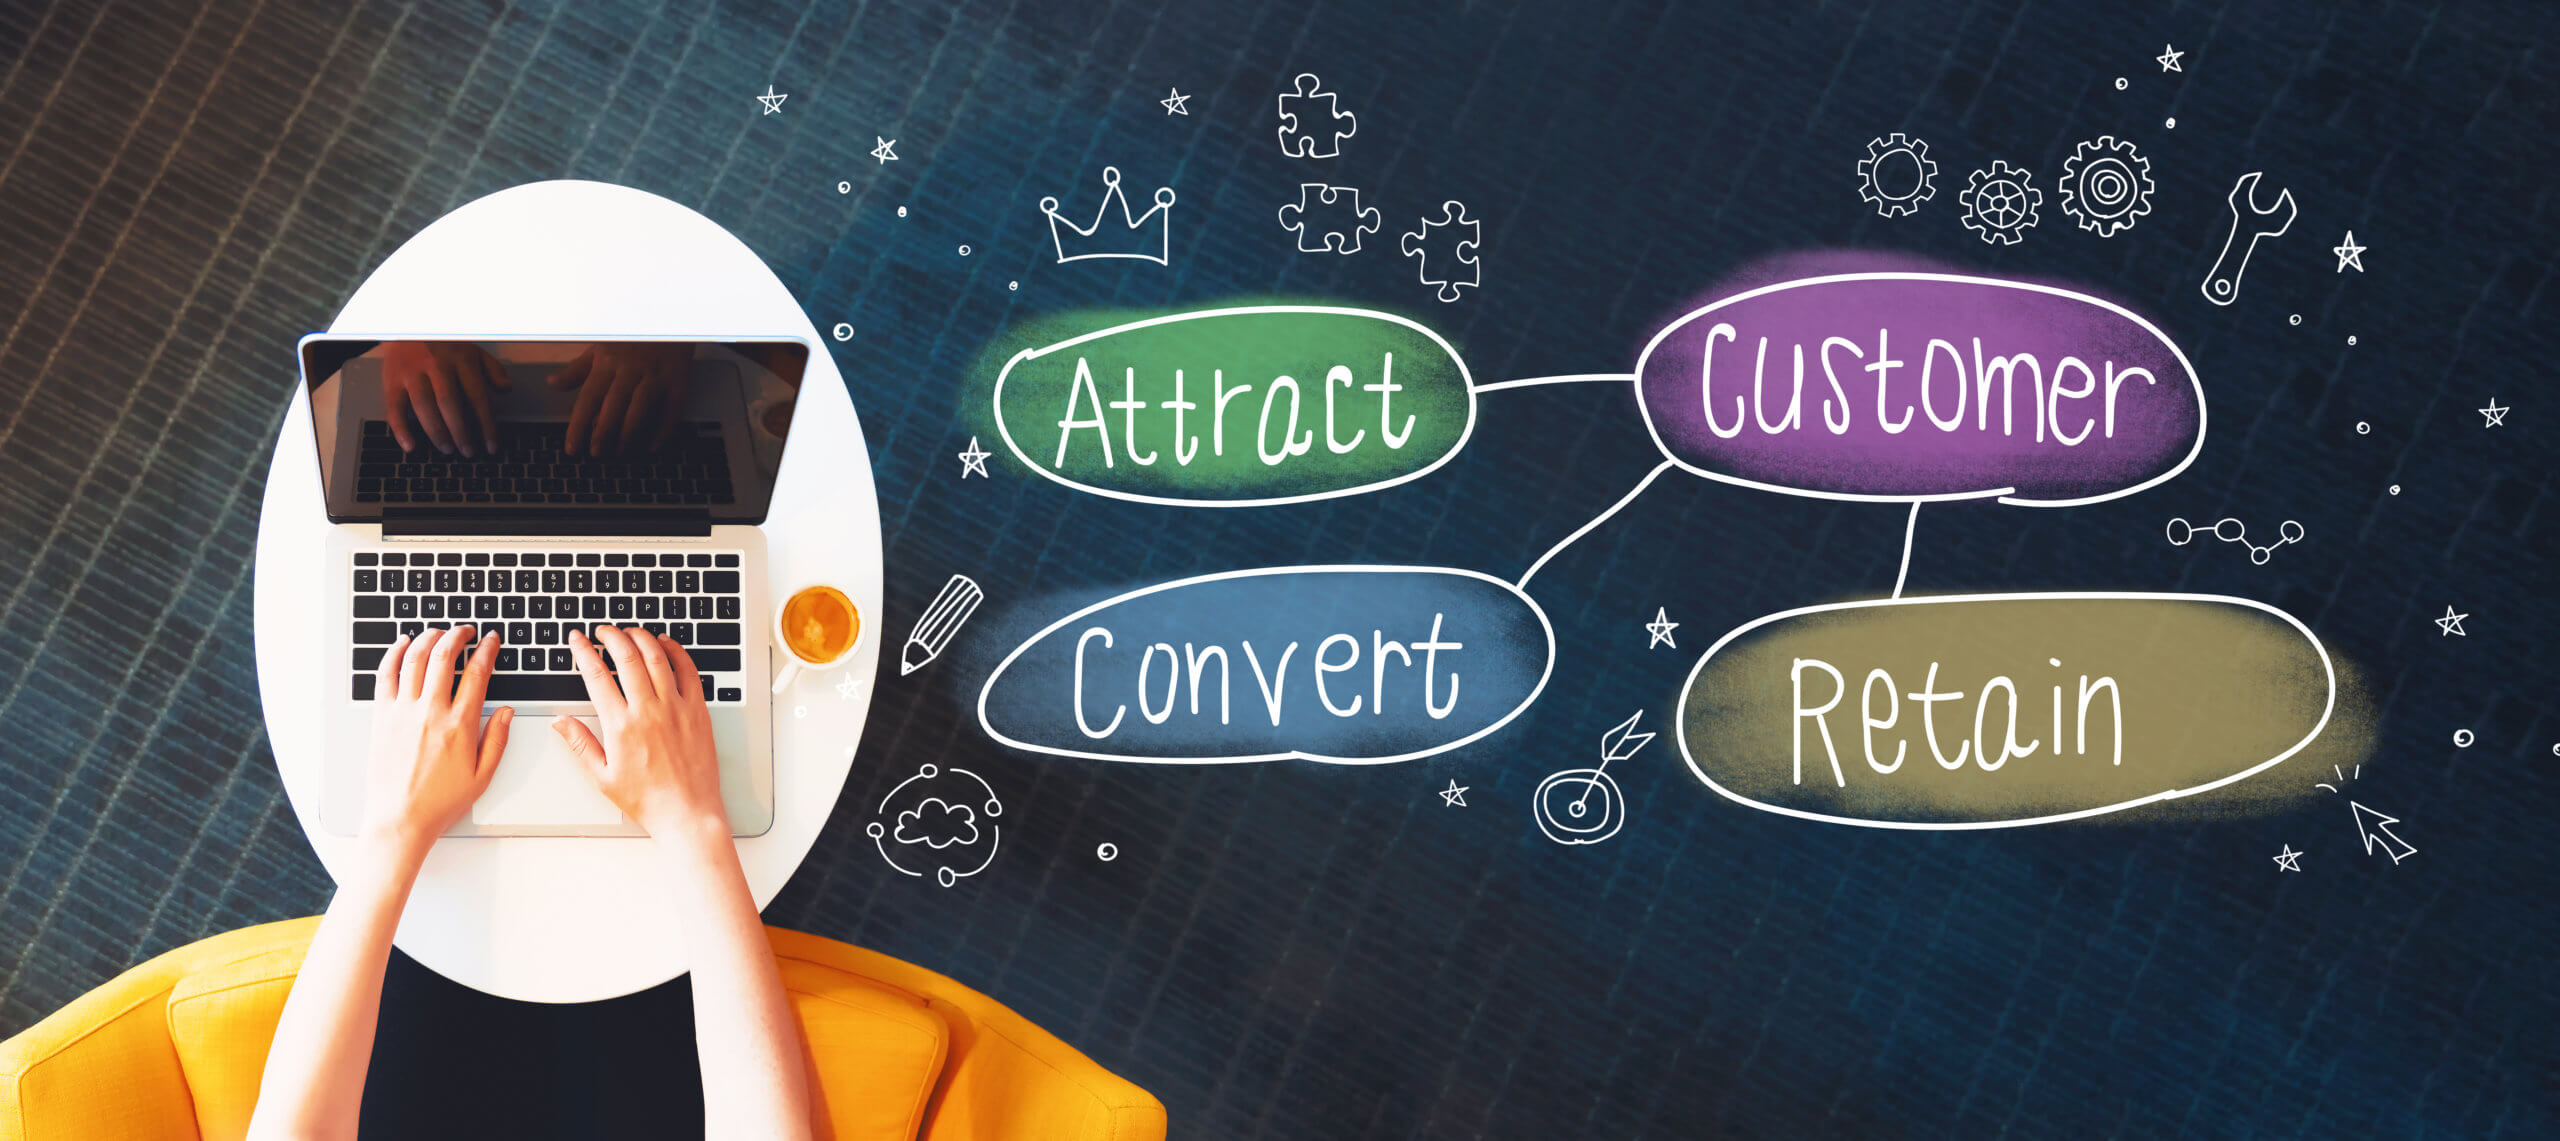 Lifecycle Marketing - Attracting, Converting and Retaining Customers